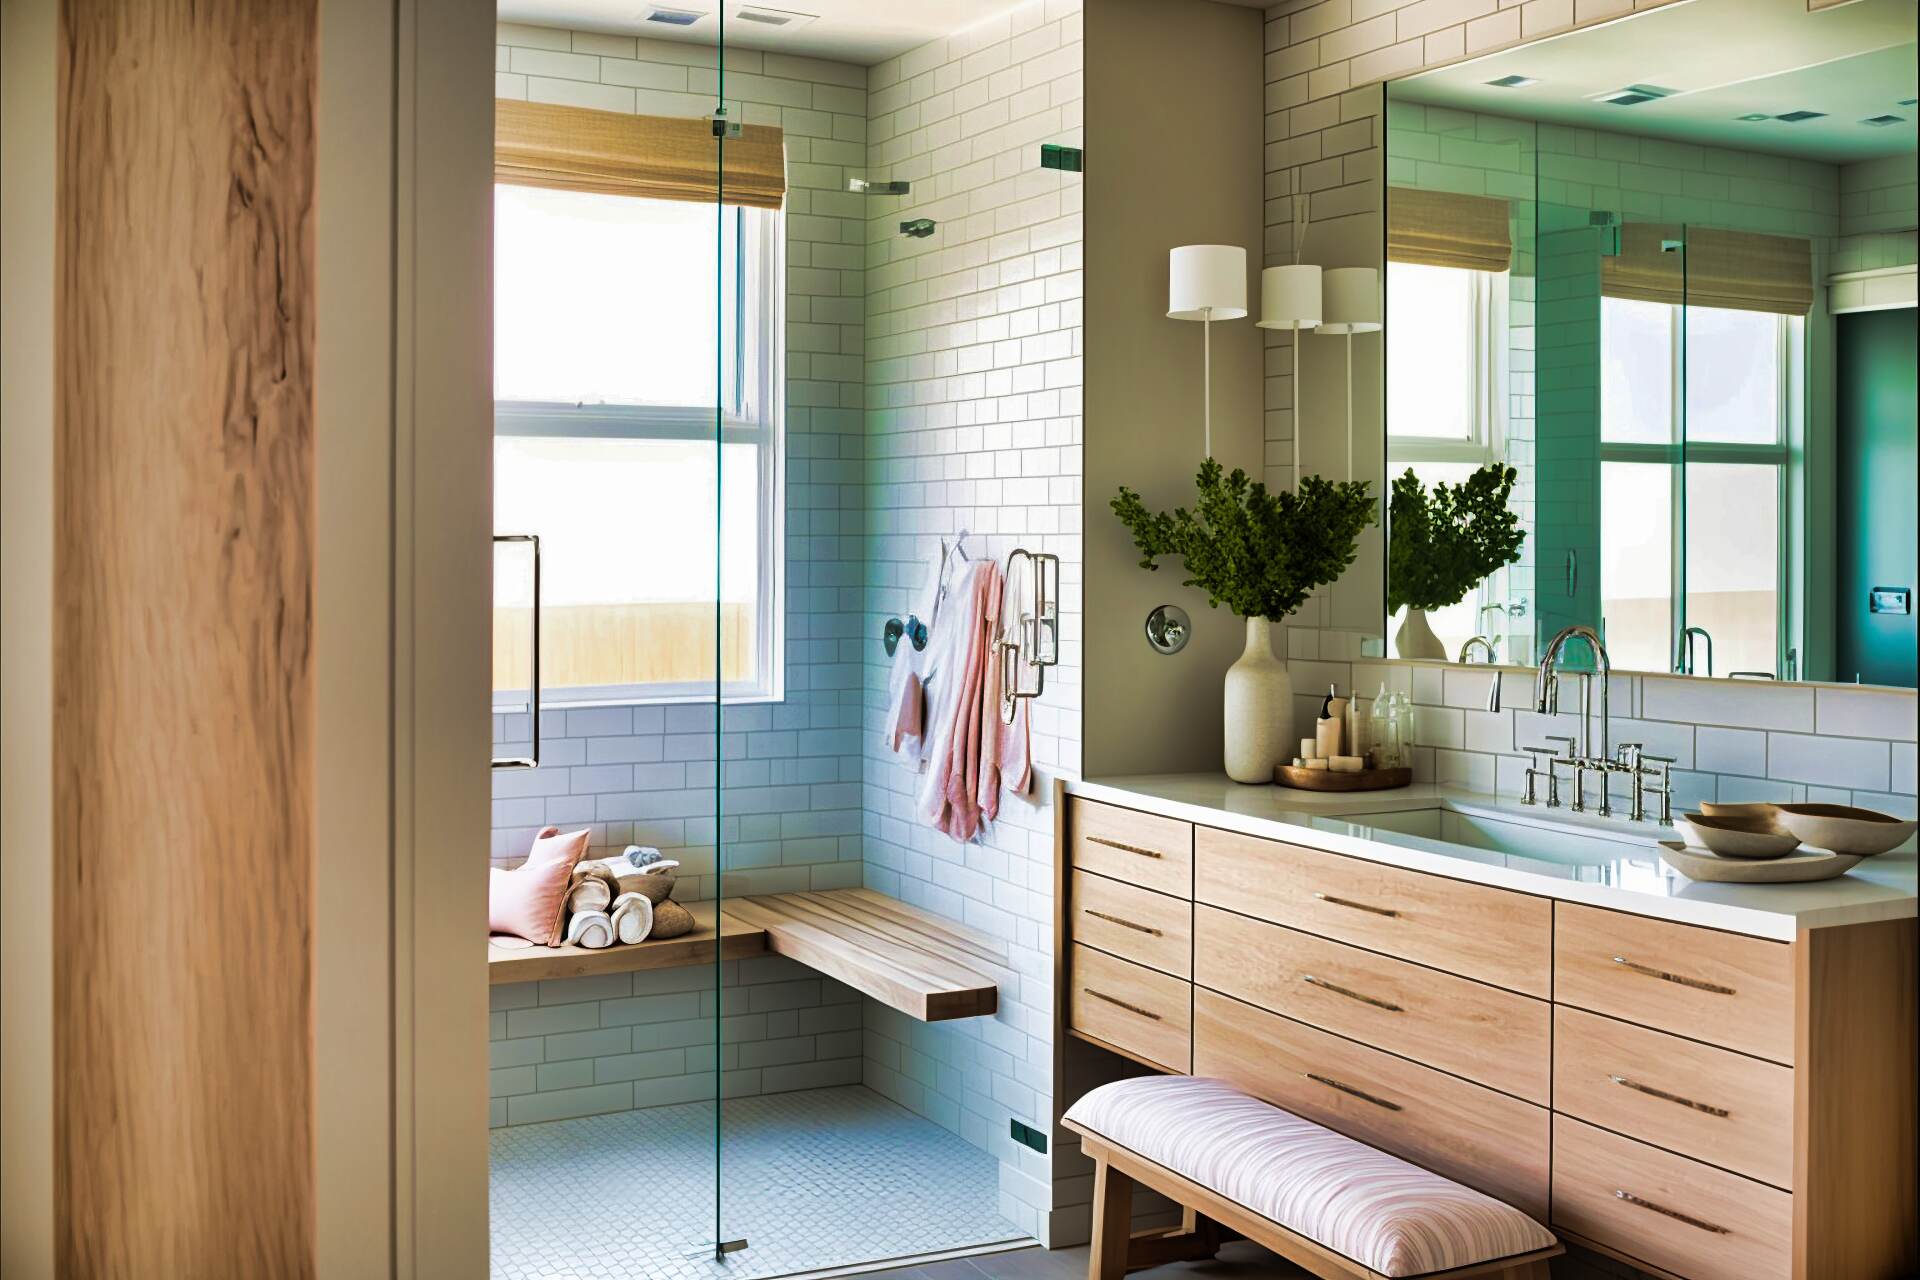 A Modern Bathroom With A Beach House Aesthetic. The Space Features A Floating Vanity With A White Sink And A Large Mirror. The Shower Has A Glass Partition, A Rainfall Showerhead, And A Built-In Bench. The Floors Are A Light Wood-Look Tile, And The Walls Are White Subway Tile With A Mix Of Natural Stone Accents. The Room Is Illuminated By Recessed Lighting And A Large Window That Brings In Natural Light.